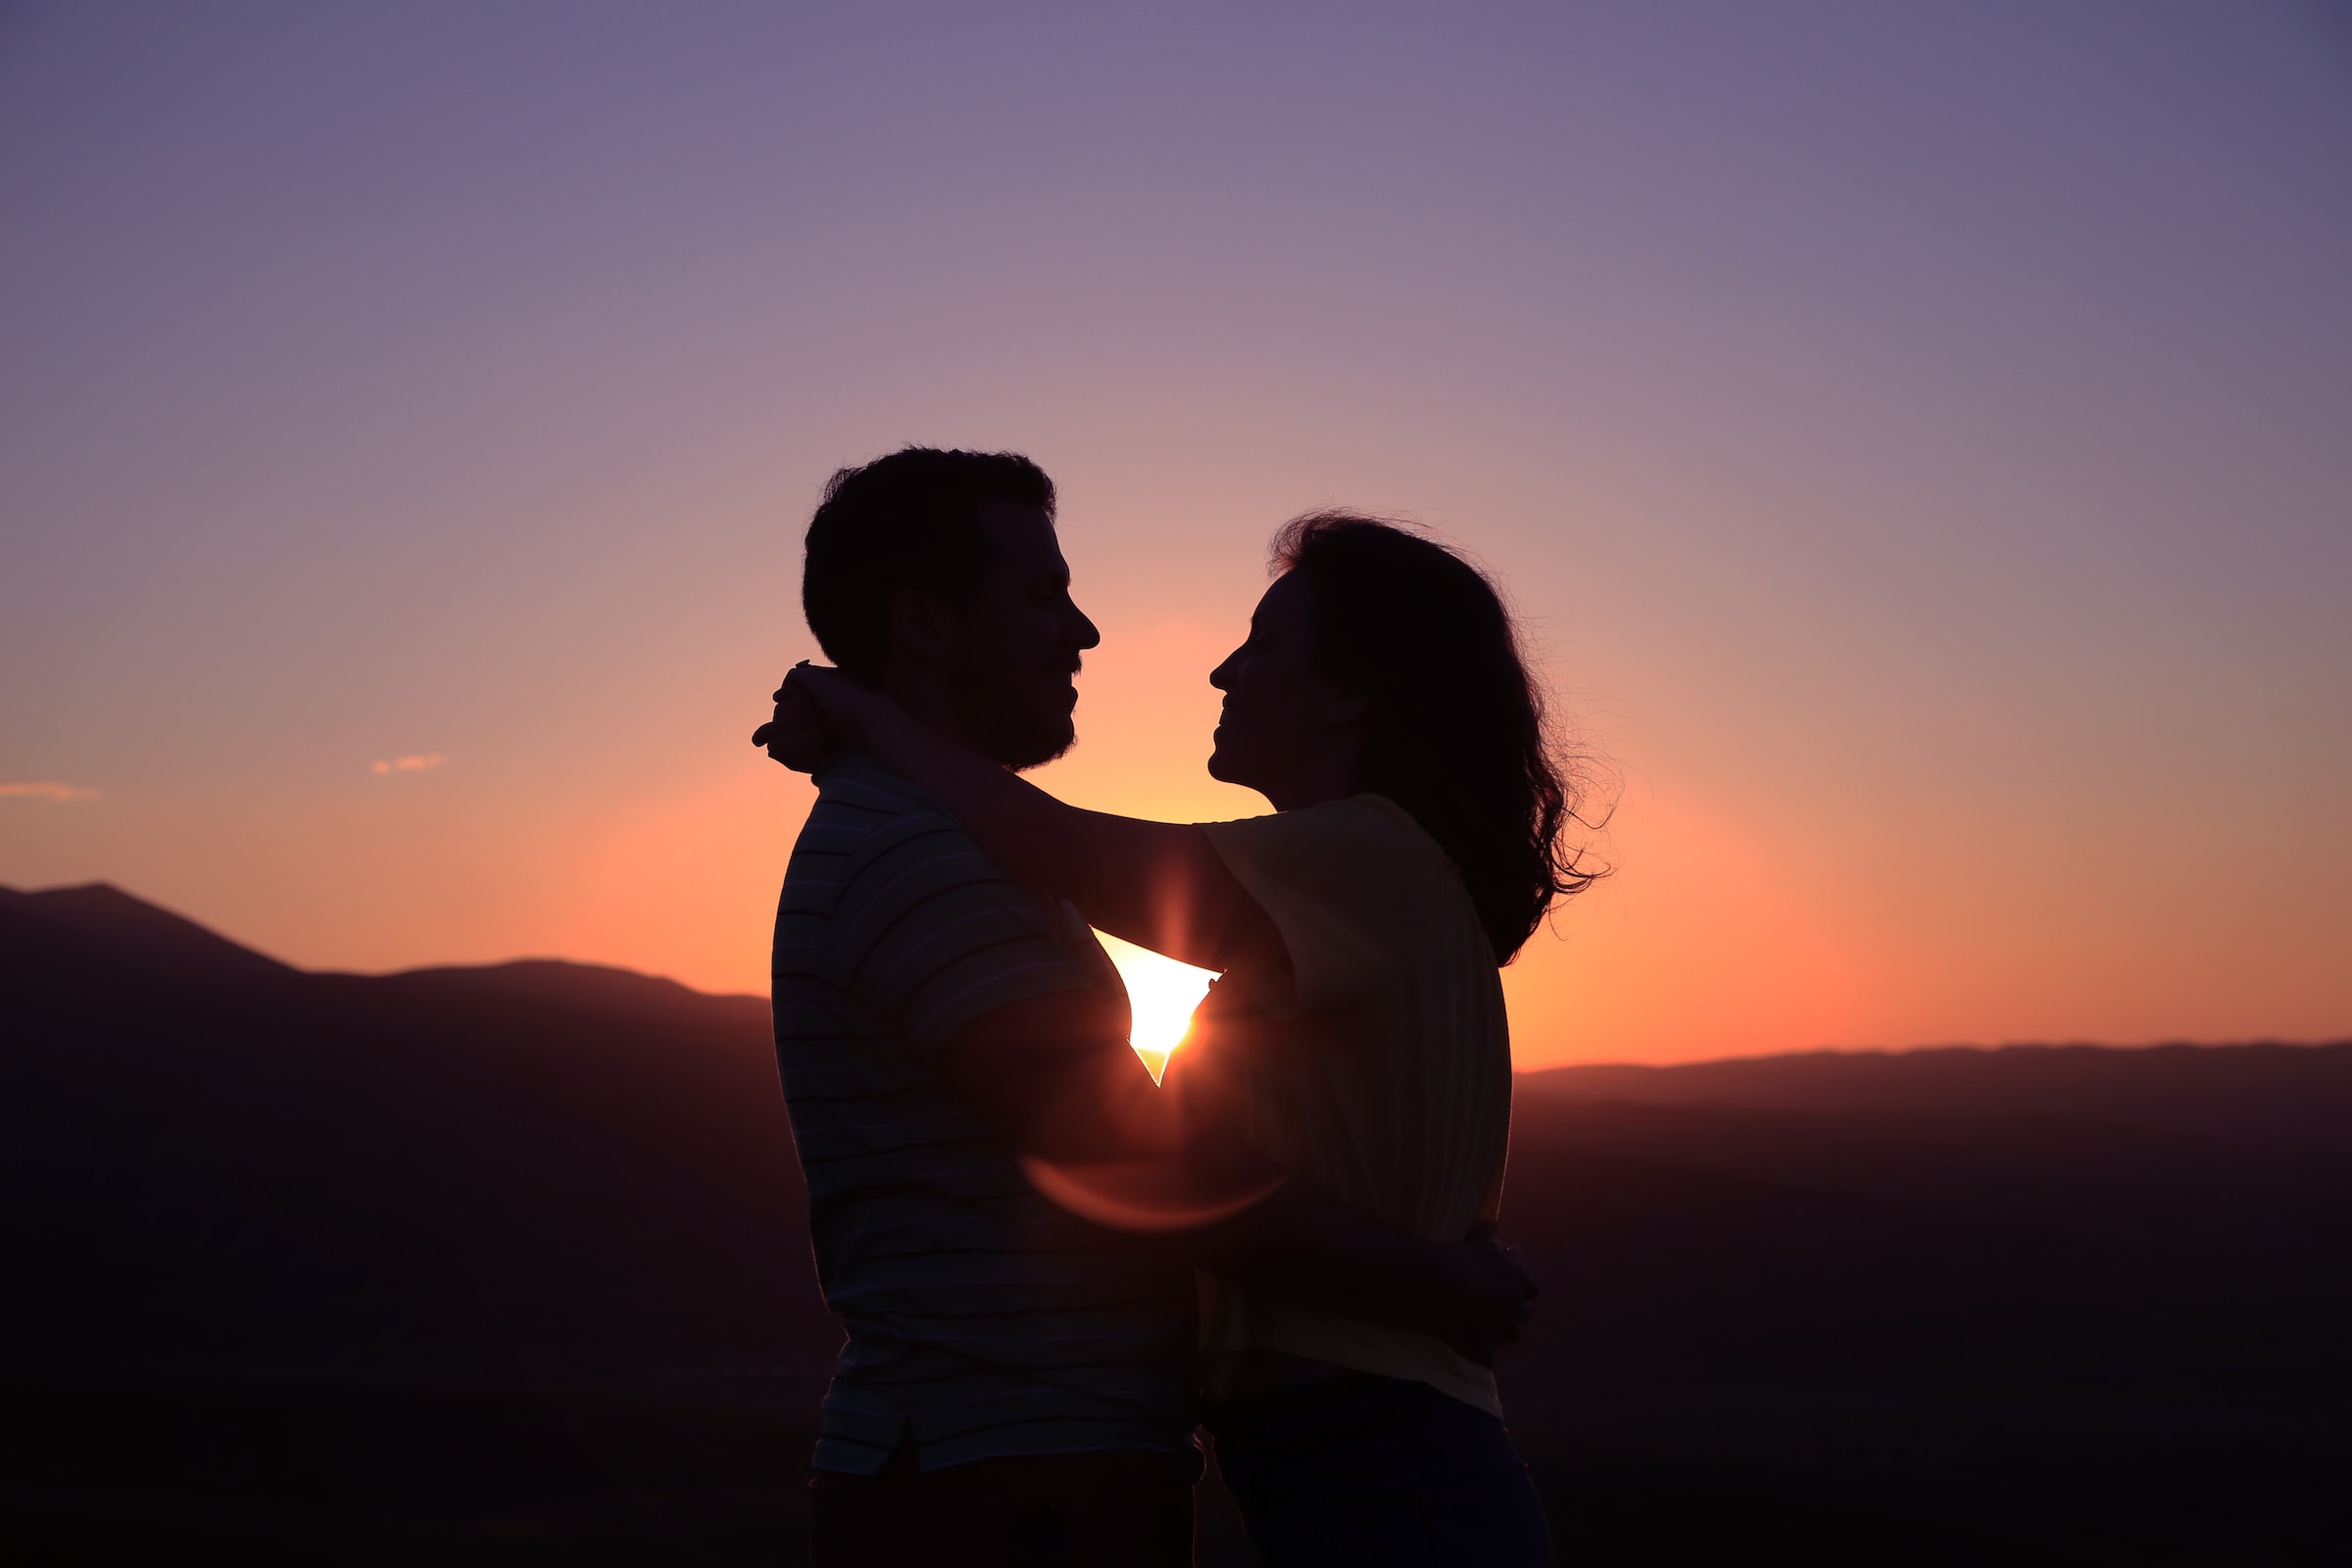 Couple embracing in frontof the sunset. | Source: Unsplash